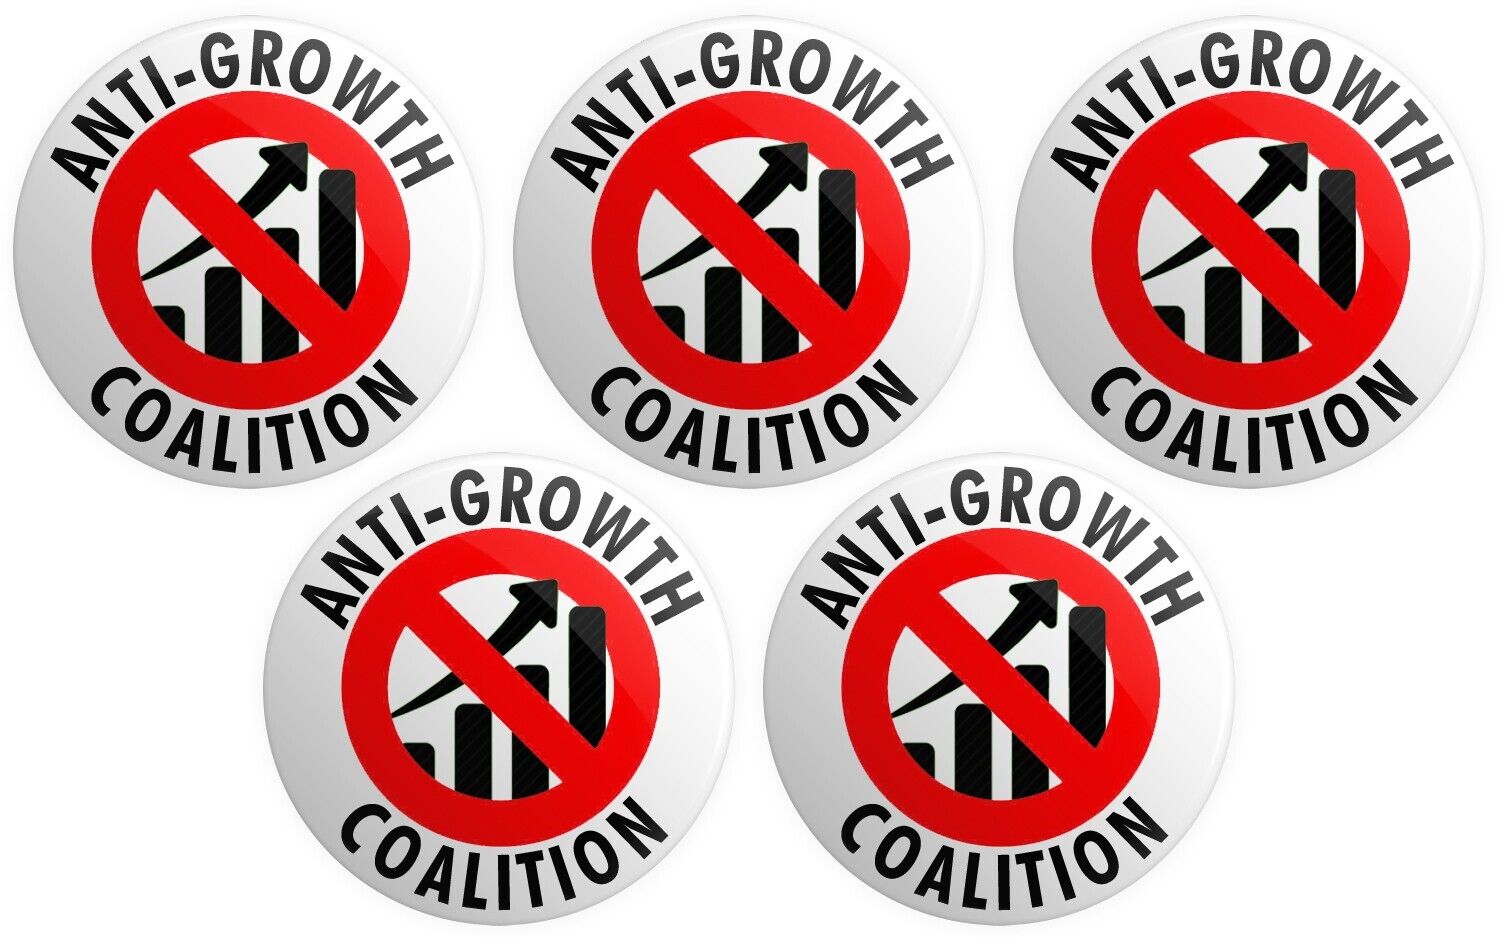 5 x Anti Growth Coalition BUTTON PIN BADGES 25mm 1 INCH Truss Tory Conservative